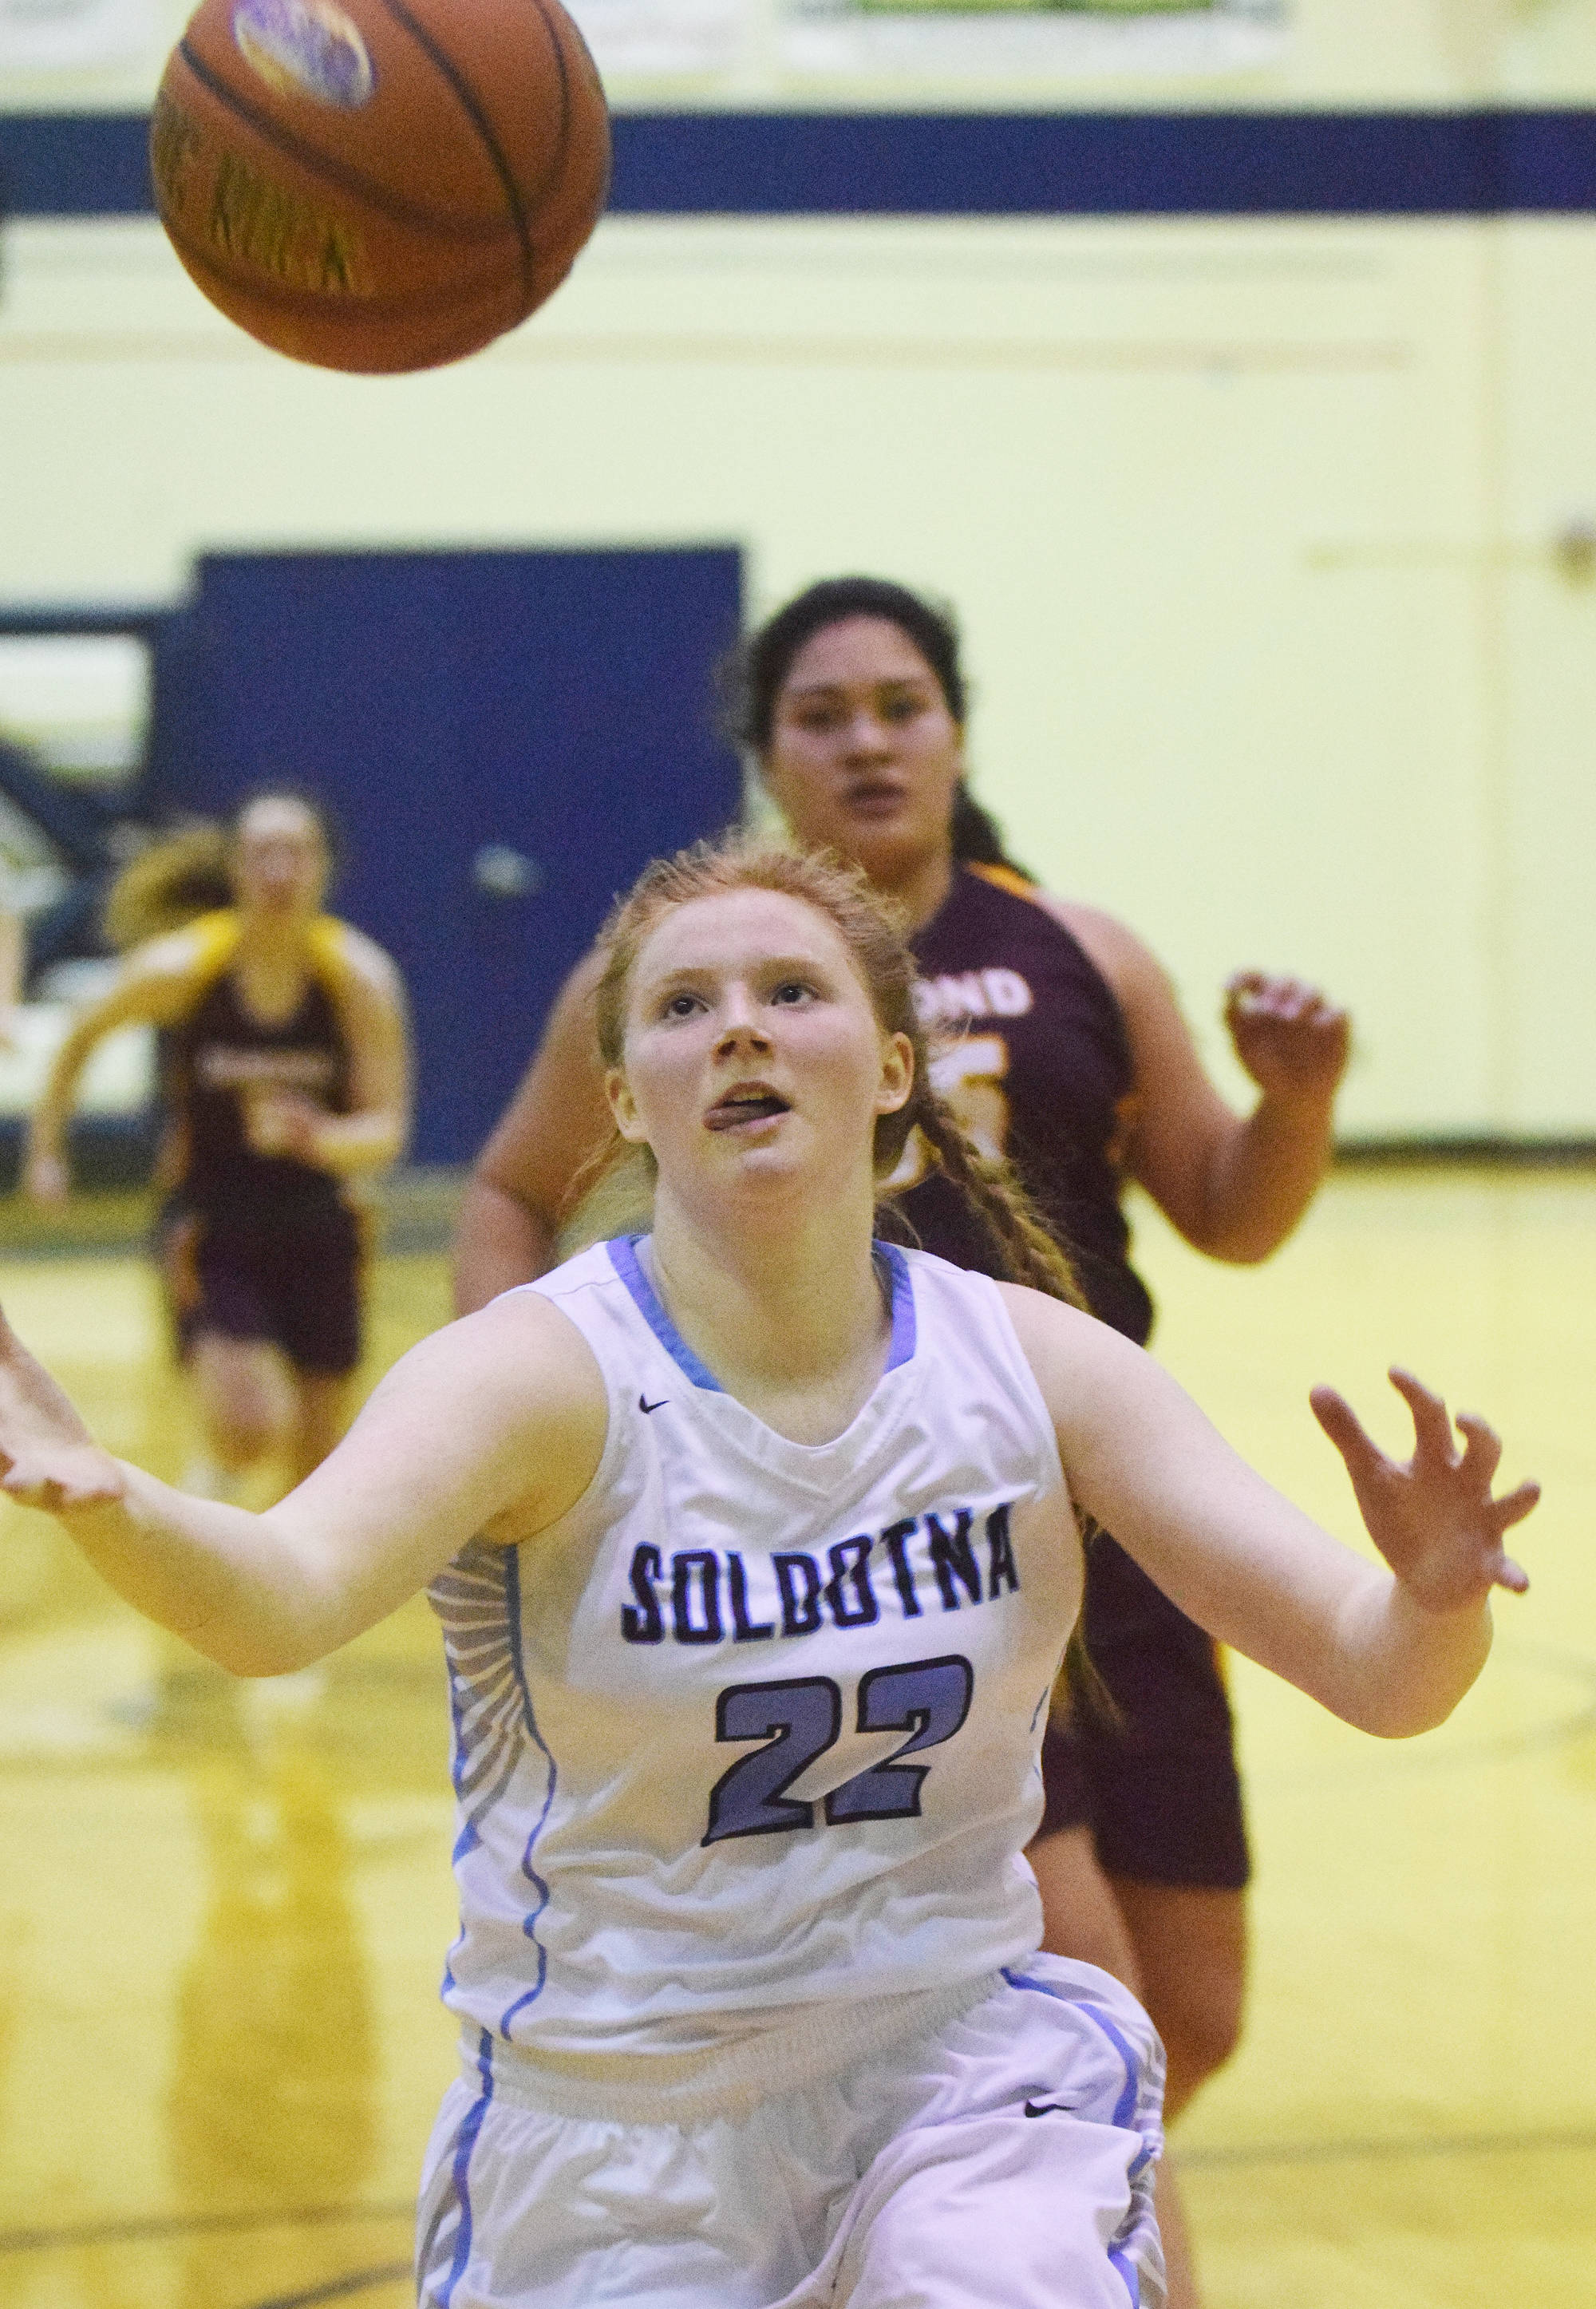 Soldotna sophomore Kianna Holland chases after the ball Saturday night against the Dimond Lynx at Soldotna High School. (Photo by Joey Klecka/Peninsula Clarion)